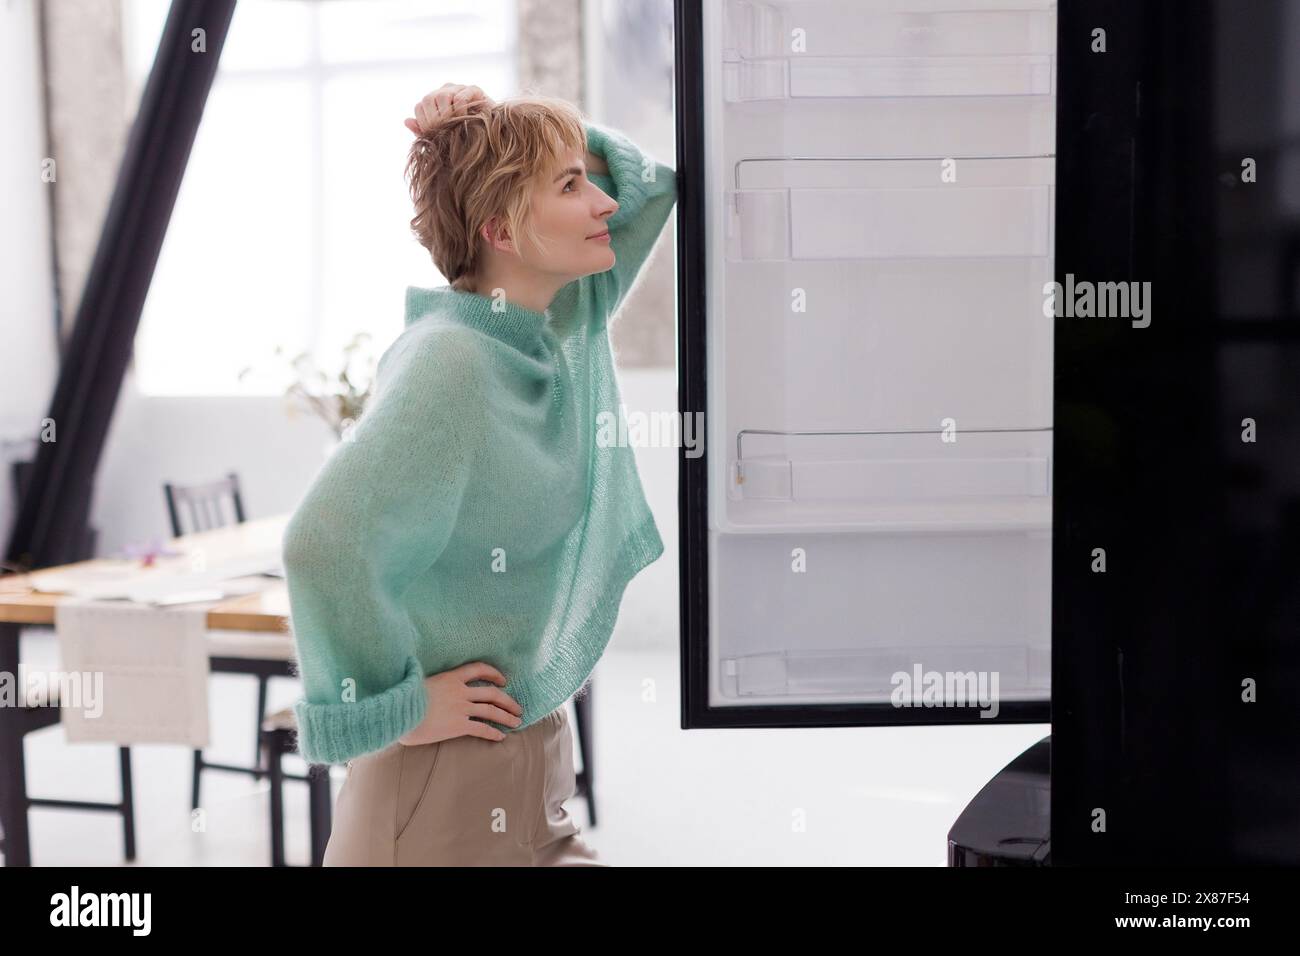 Blond woman with hand on hip leaning on refrigerator door at home Stock Photo